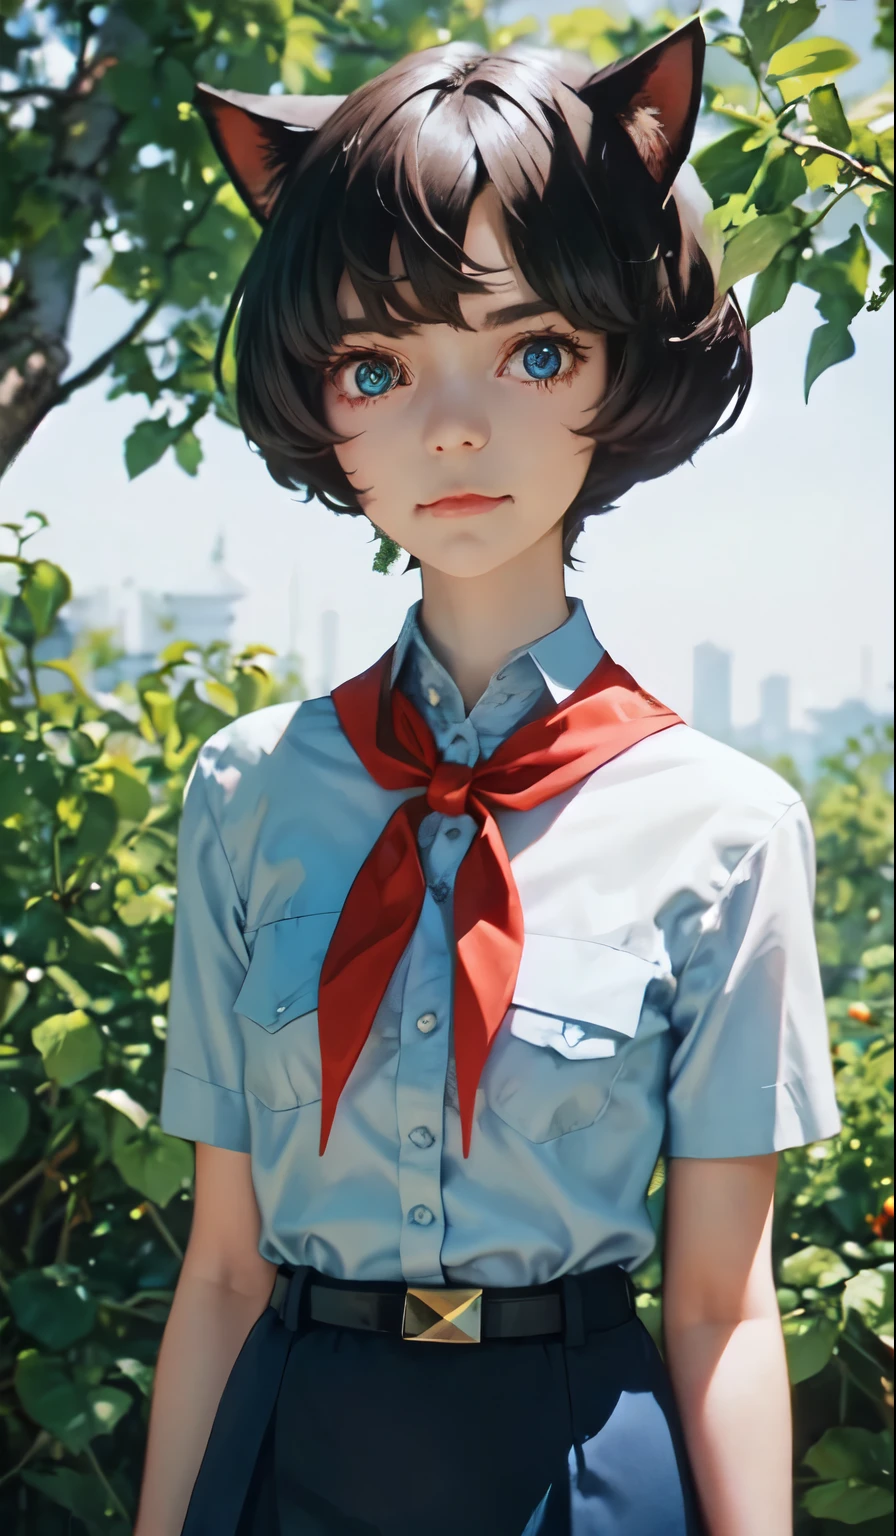 very young slim fit girl, full height, rounded face, (disheveled short hair:1.4), big blue eyes, shy smile, perfect flat breast, band on head with fake cat ears, pioneer neckerchief, short tight blue pleated skirt, bangs, tight white shirt, short sleeves, collared shirt, belt, red neckerchief, breast pocket
